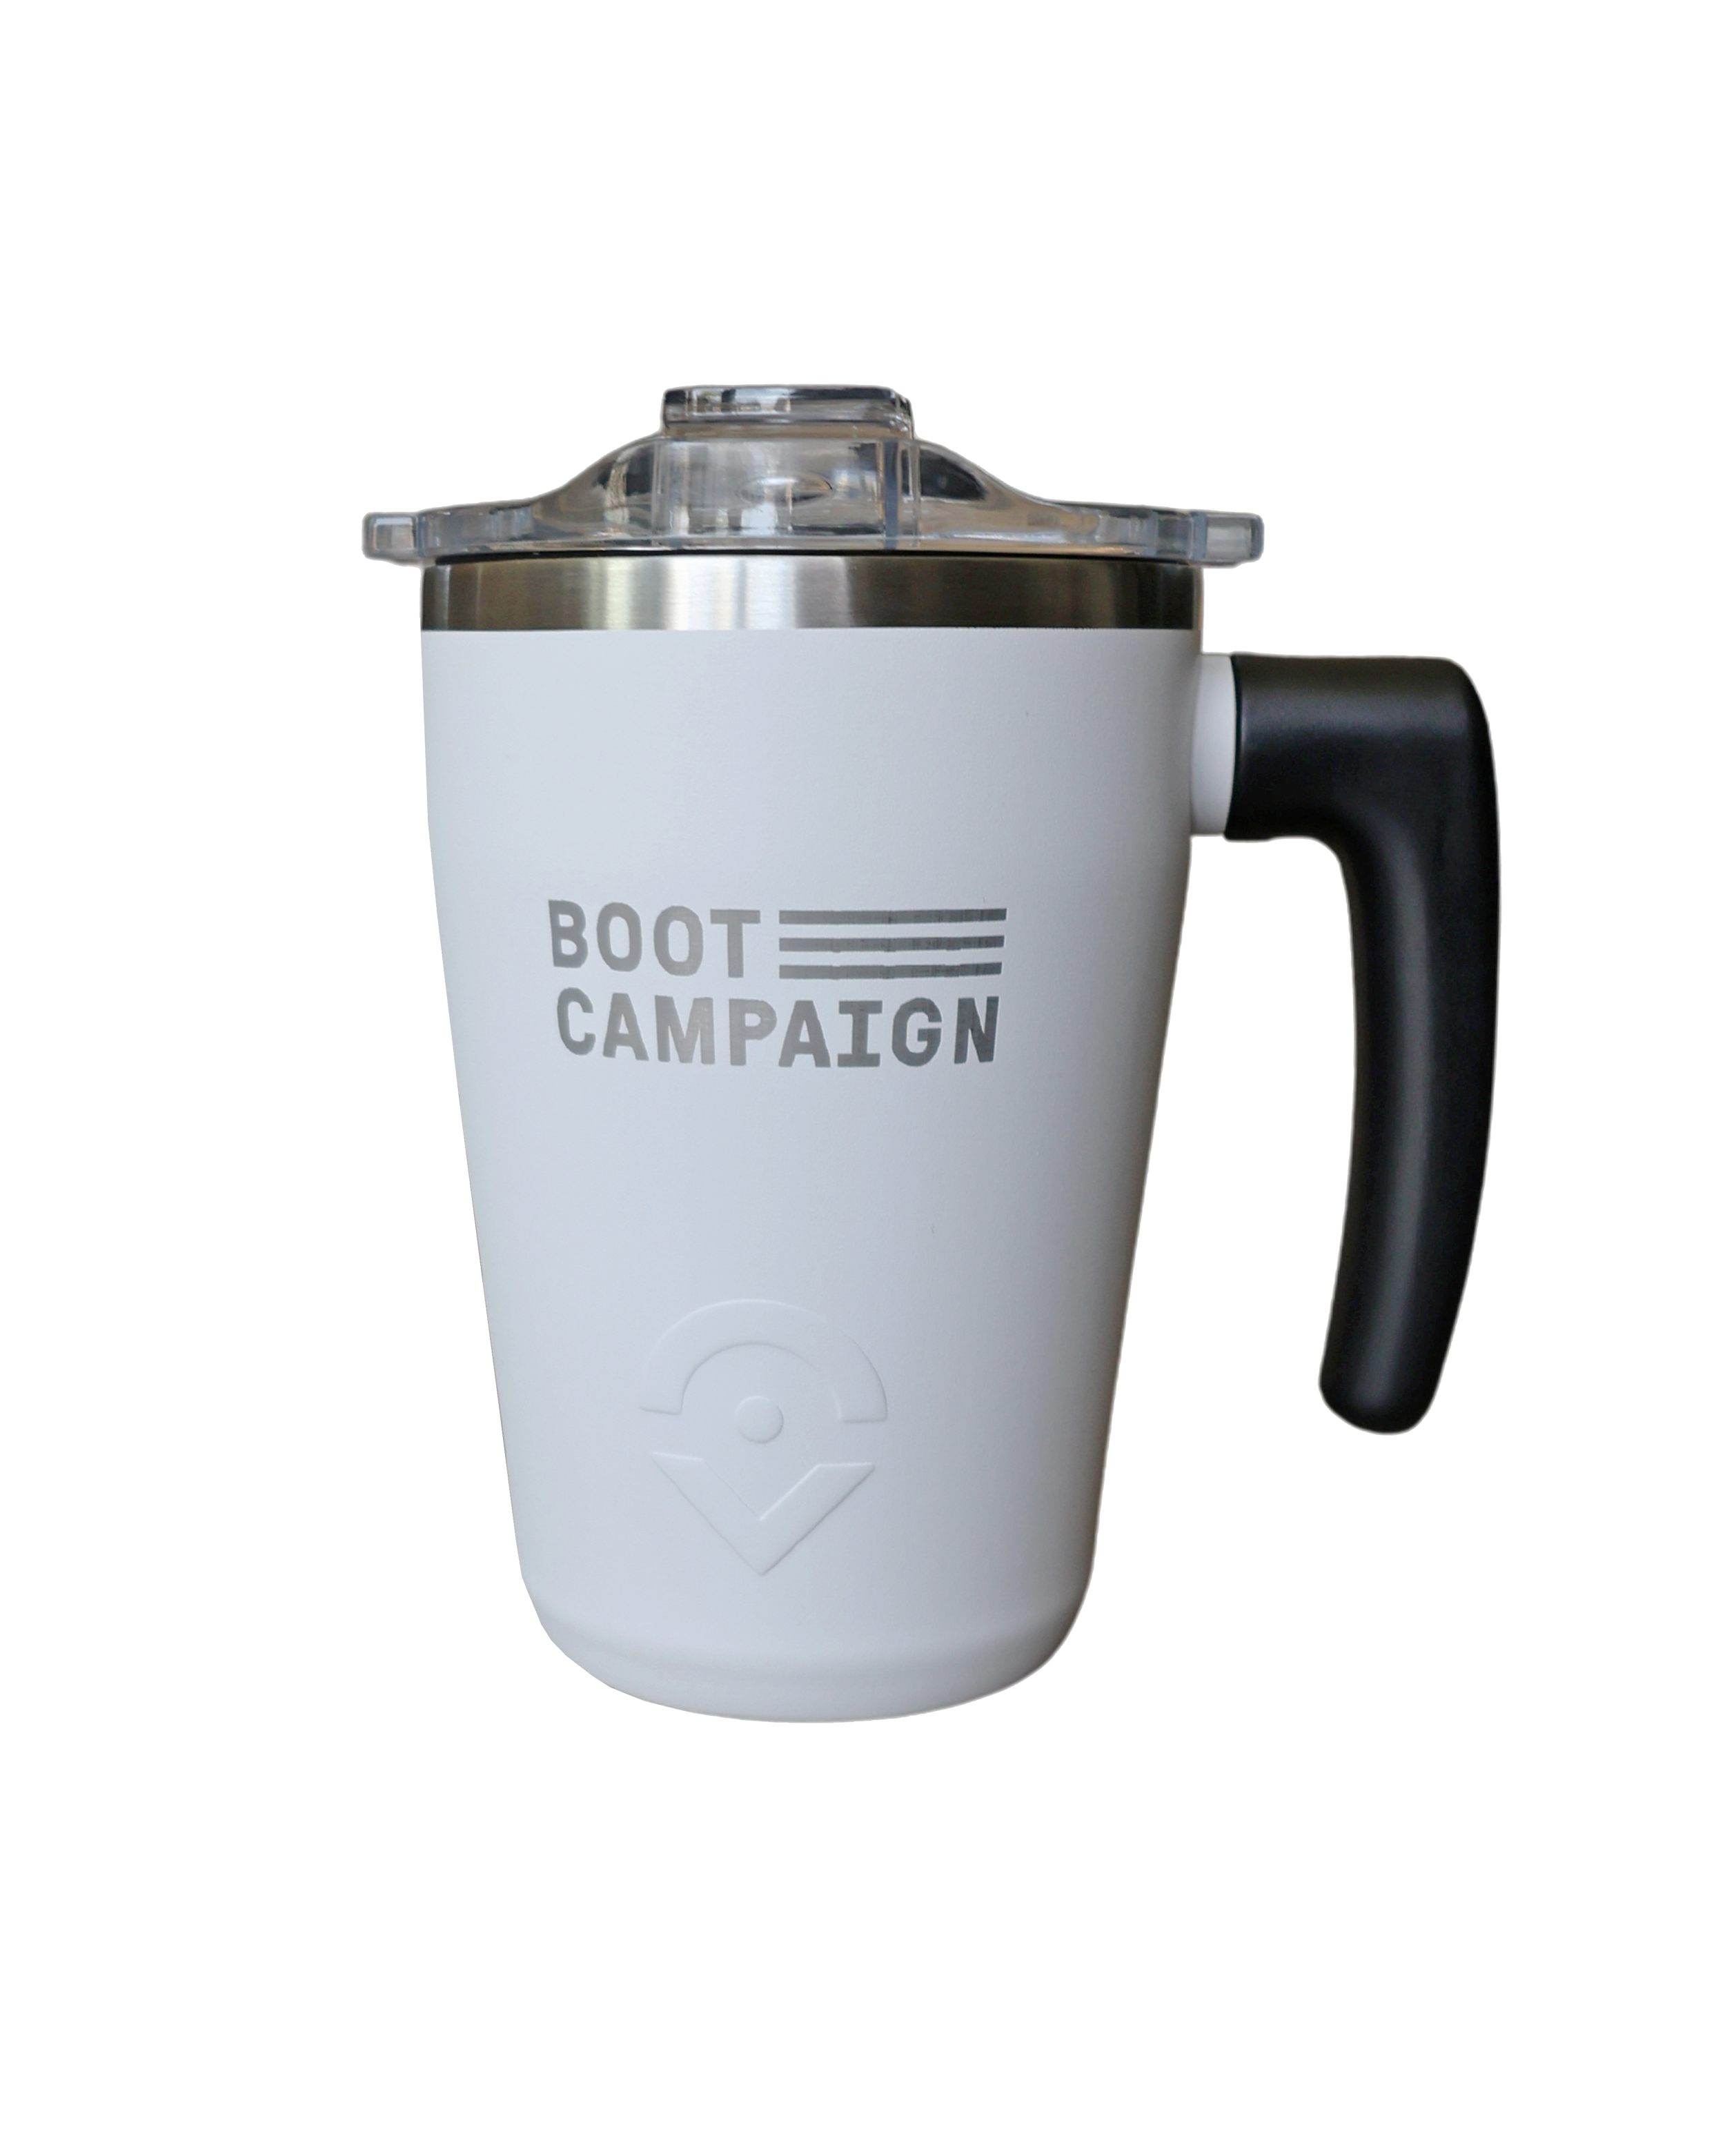 The AM Boot Campaign Mug by Outsider